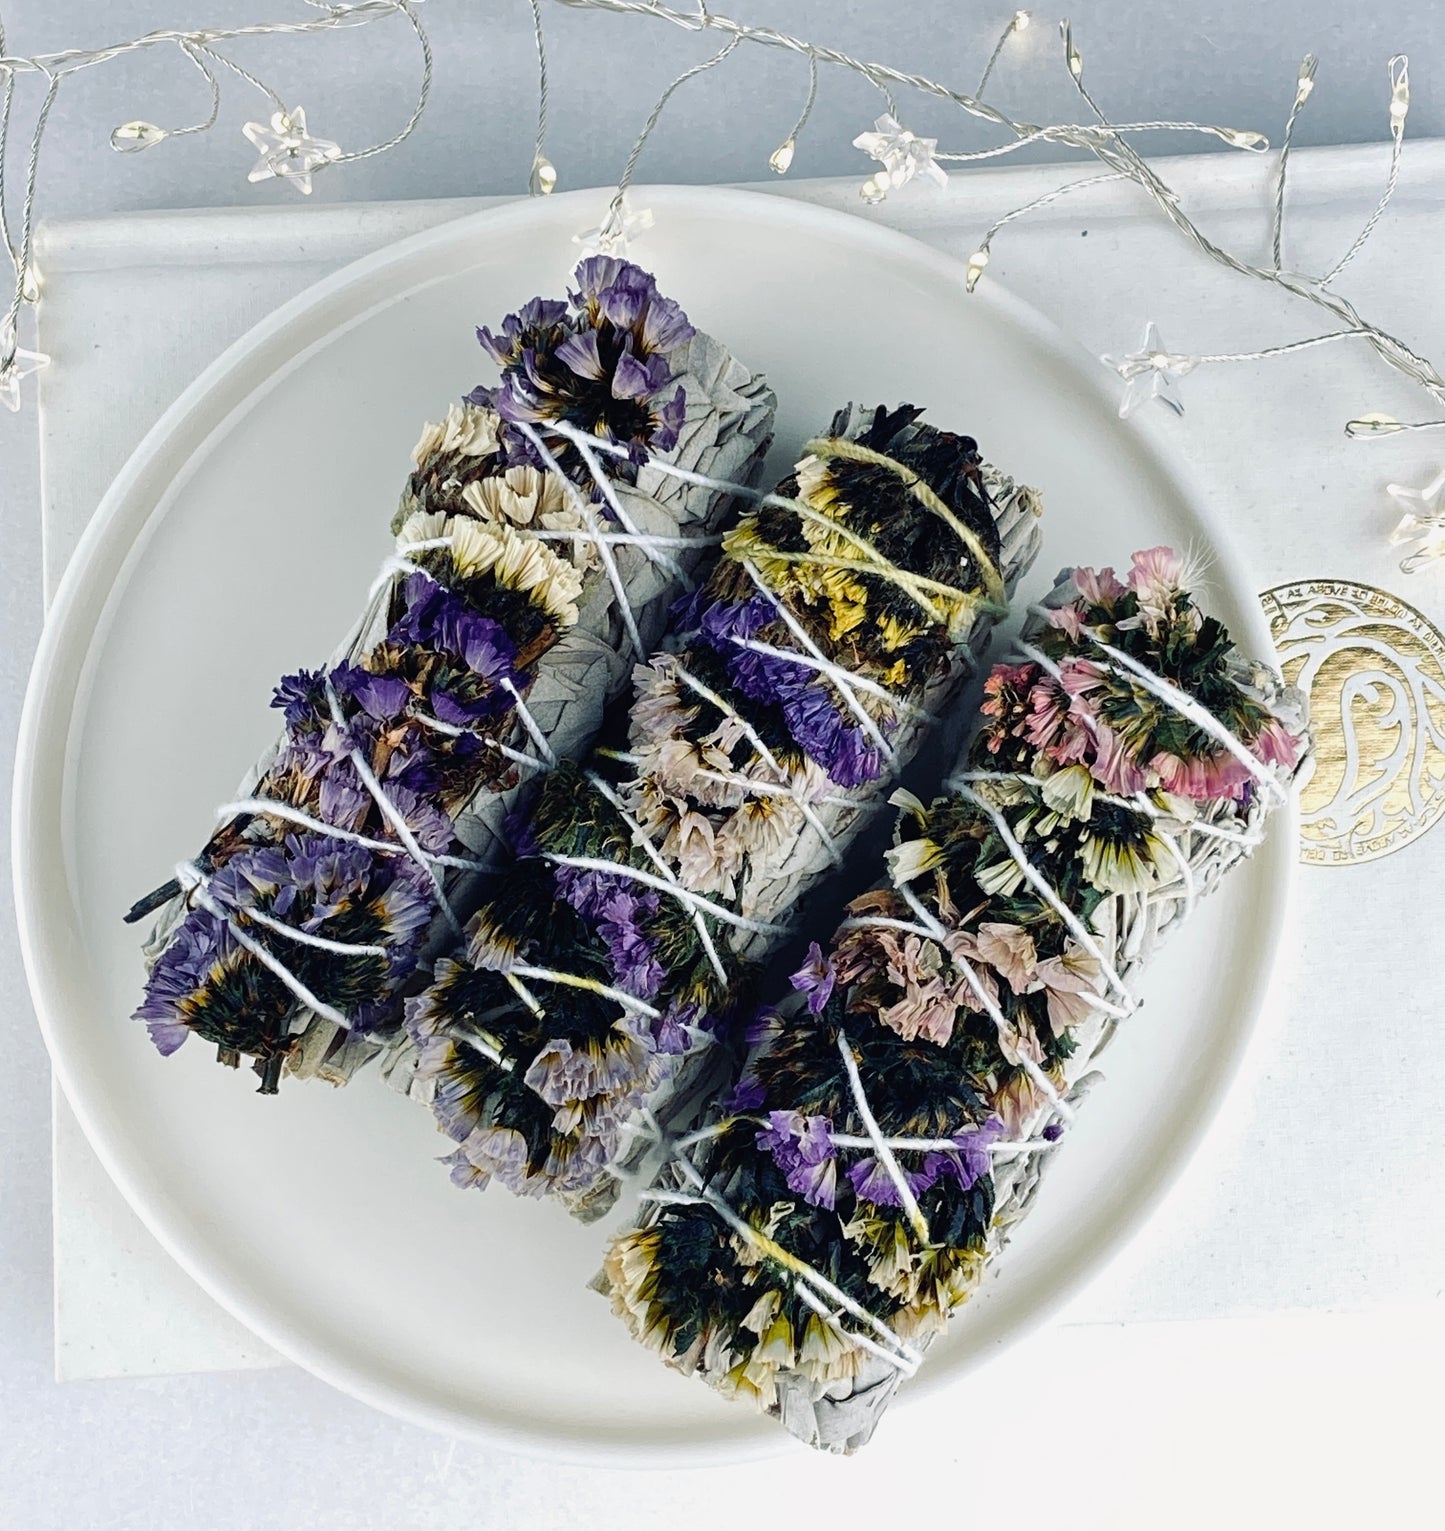 White sage smudge stick with flowers ~ Cleanse your aura, home and crystals.